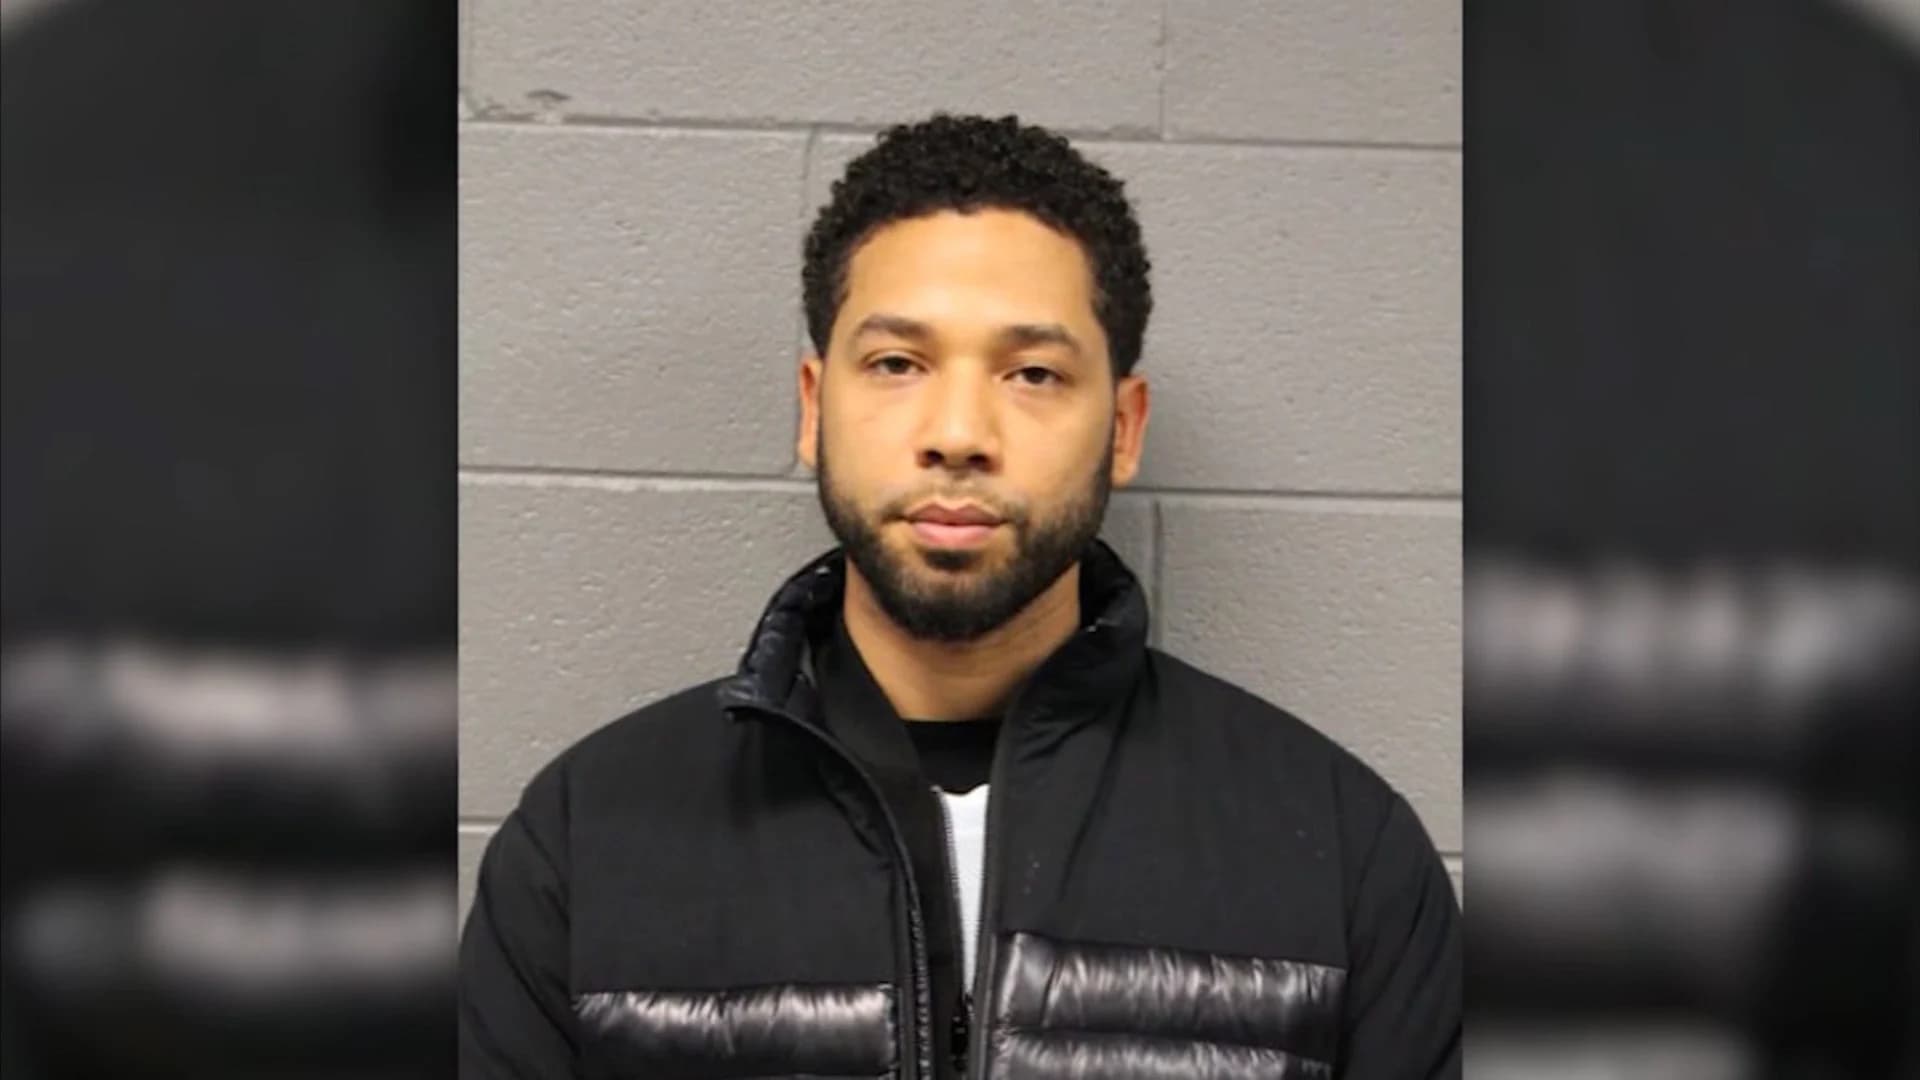 Prosecutor: 'Empire' actor gave detailed instructions for fake attack